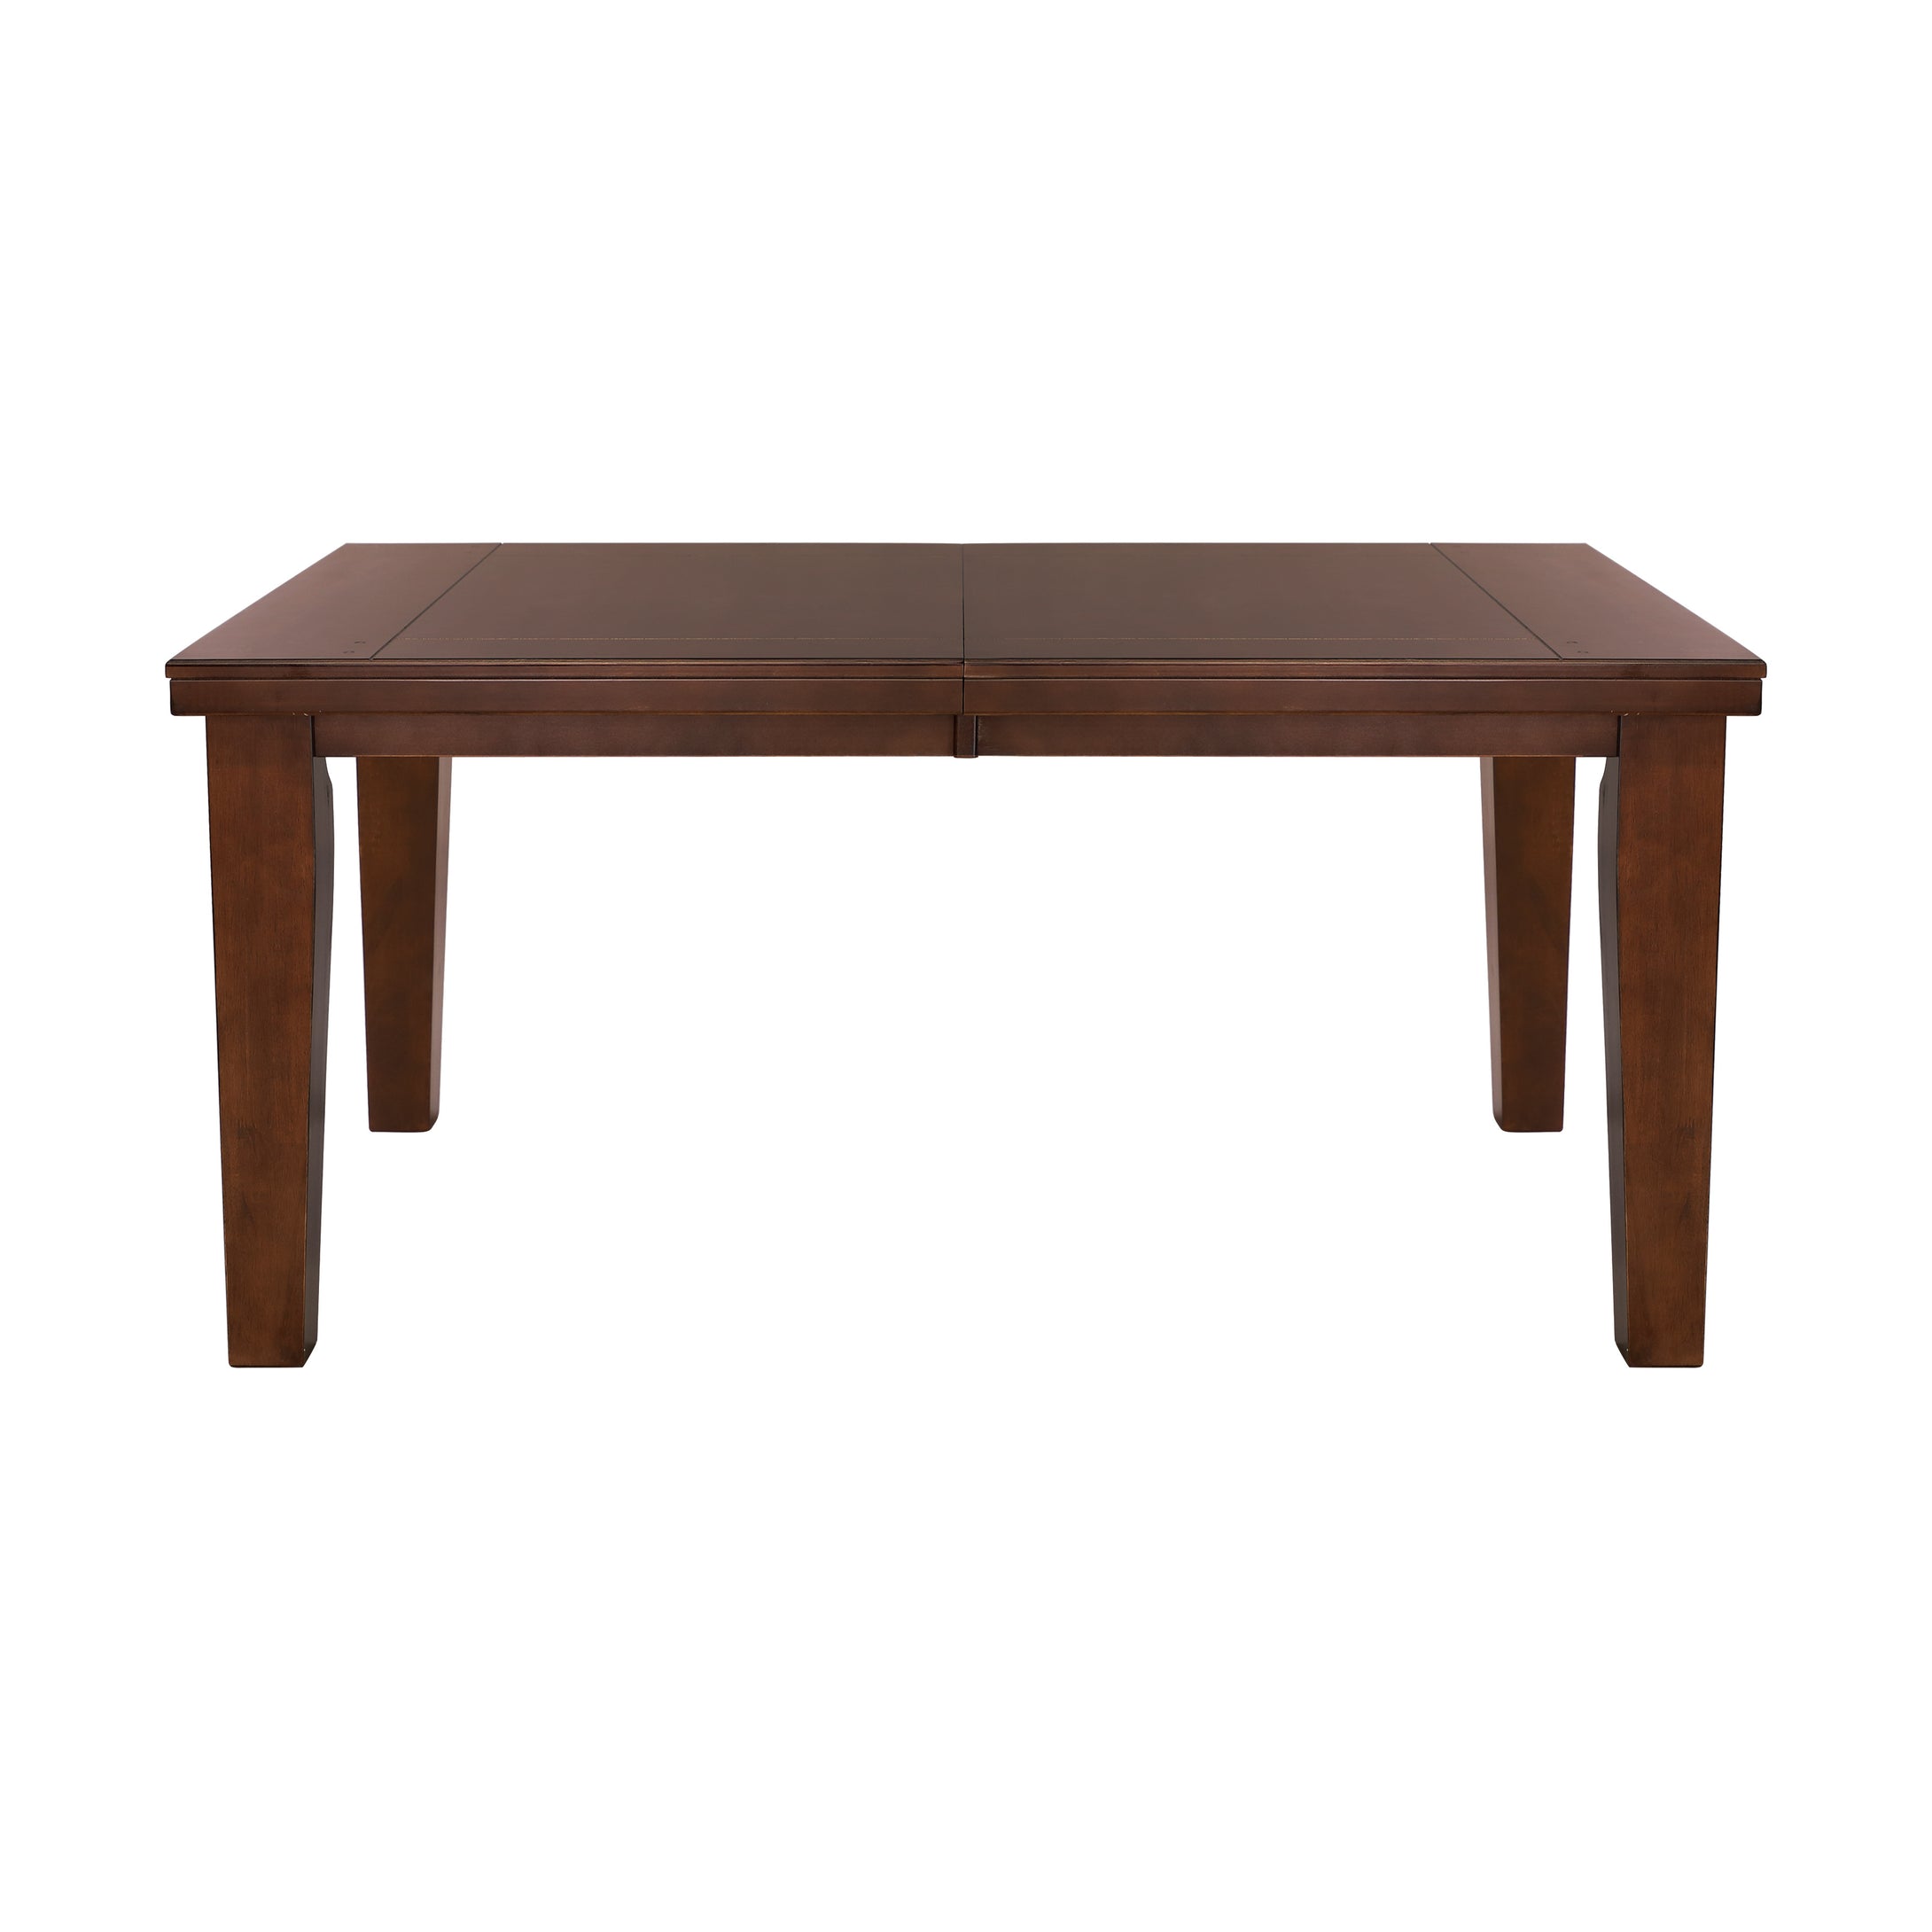 586-82 Dining Table